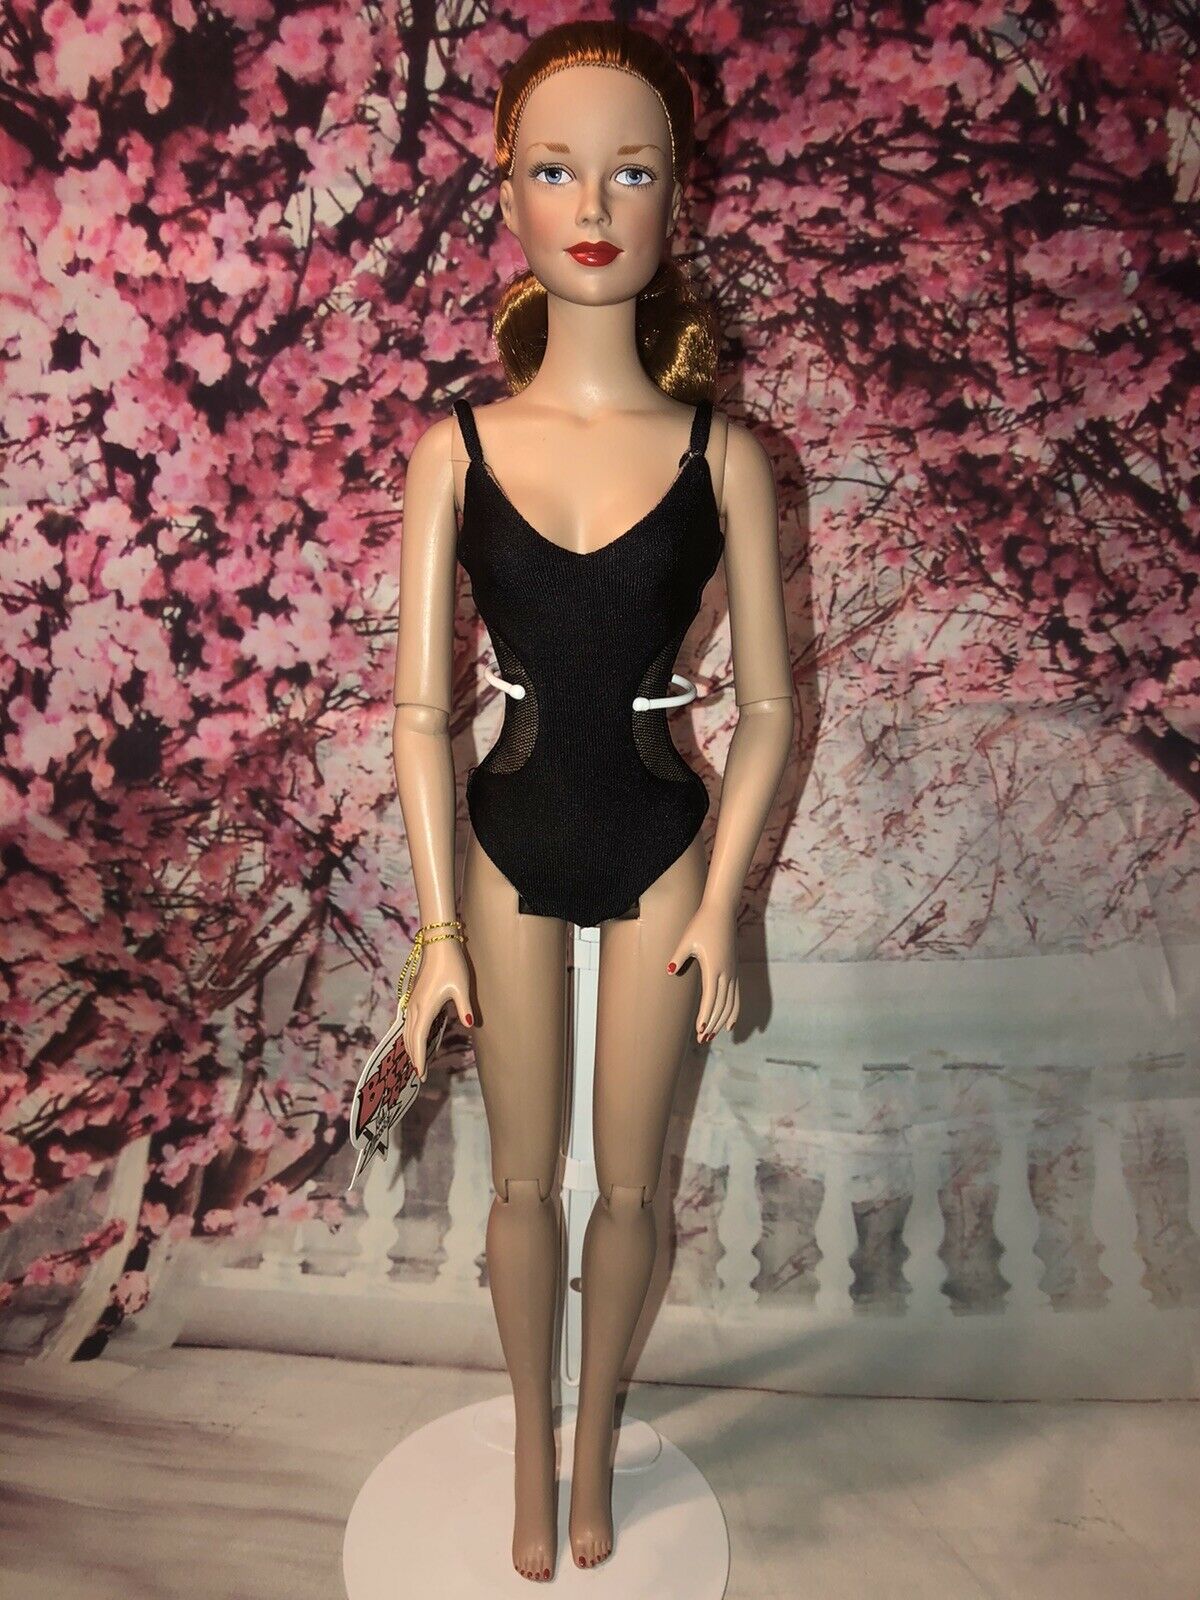 Robert Tonner Brenda Starr Doll By Effanbee-lunch At The Plaza In Lingerie W/box